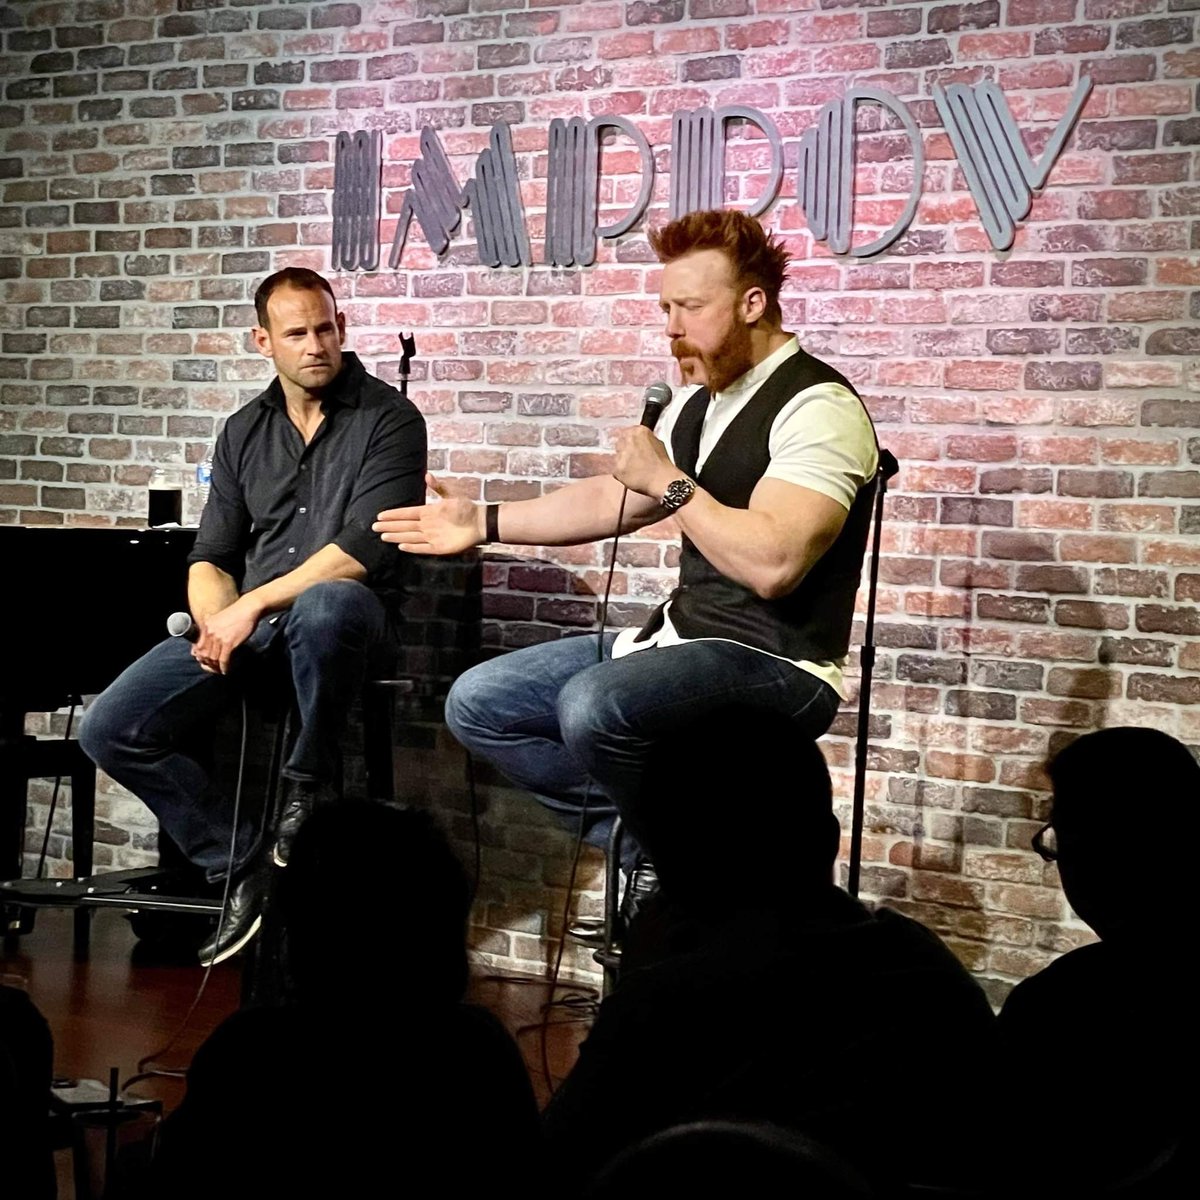 Thanks to @davidnihill for putting together The Real Irish Comedy Slam! We are sold out and watching @WWESheamus tell WWE stories now! #hollywoodimprov #comedy #sheamus